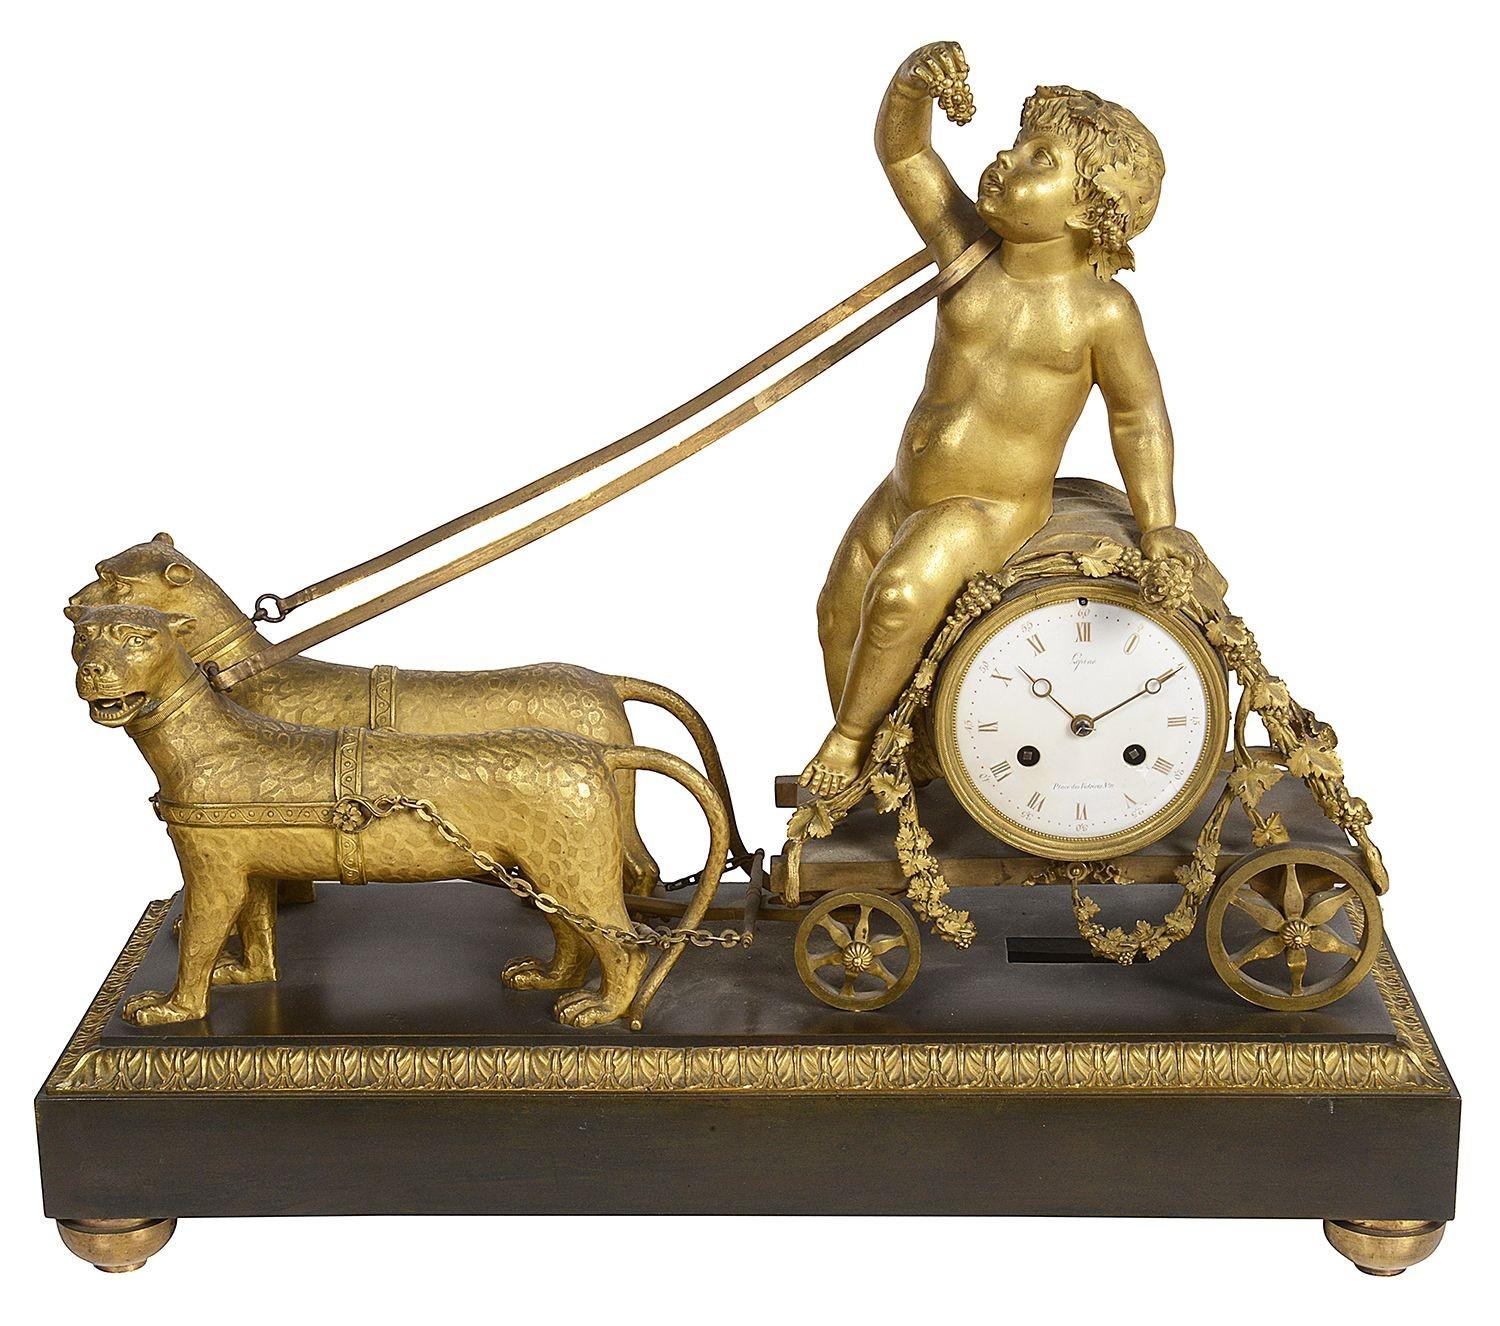 A wonderfully impressive and enchanting French Empire period mantel clock by Jean-Antoine Lépine (1720-1814), clockmaker to both King Louis XV and Louis XVI 
Depicting a pair of Leopards pulling a putti eating grapes seated on a barrel draped in